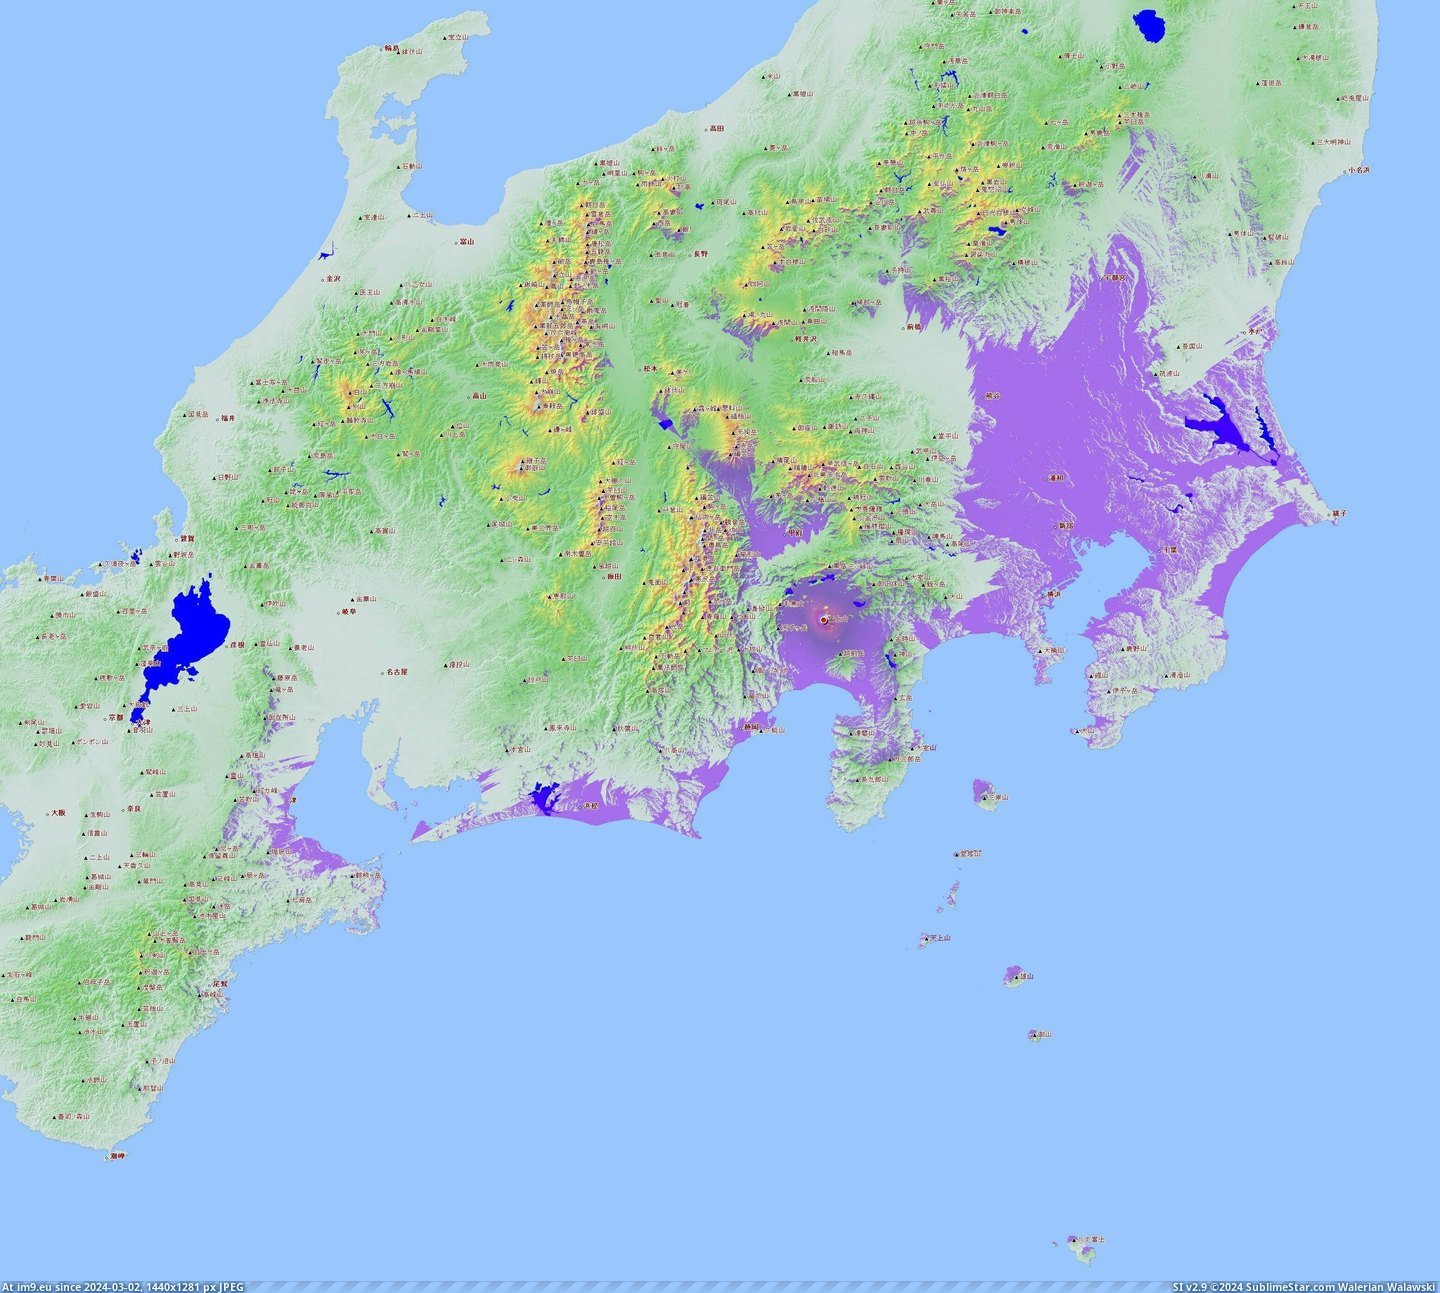 #Map #Japan #Shows #Fuji #Visibility #Mount #Purple #Potential [Mapporn] Map where purple shows potential visibility for Mount Fuji (japan) [3105x2774] Pic. (Bild von album My r/MAPS favs))